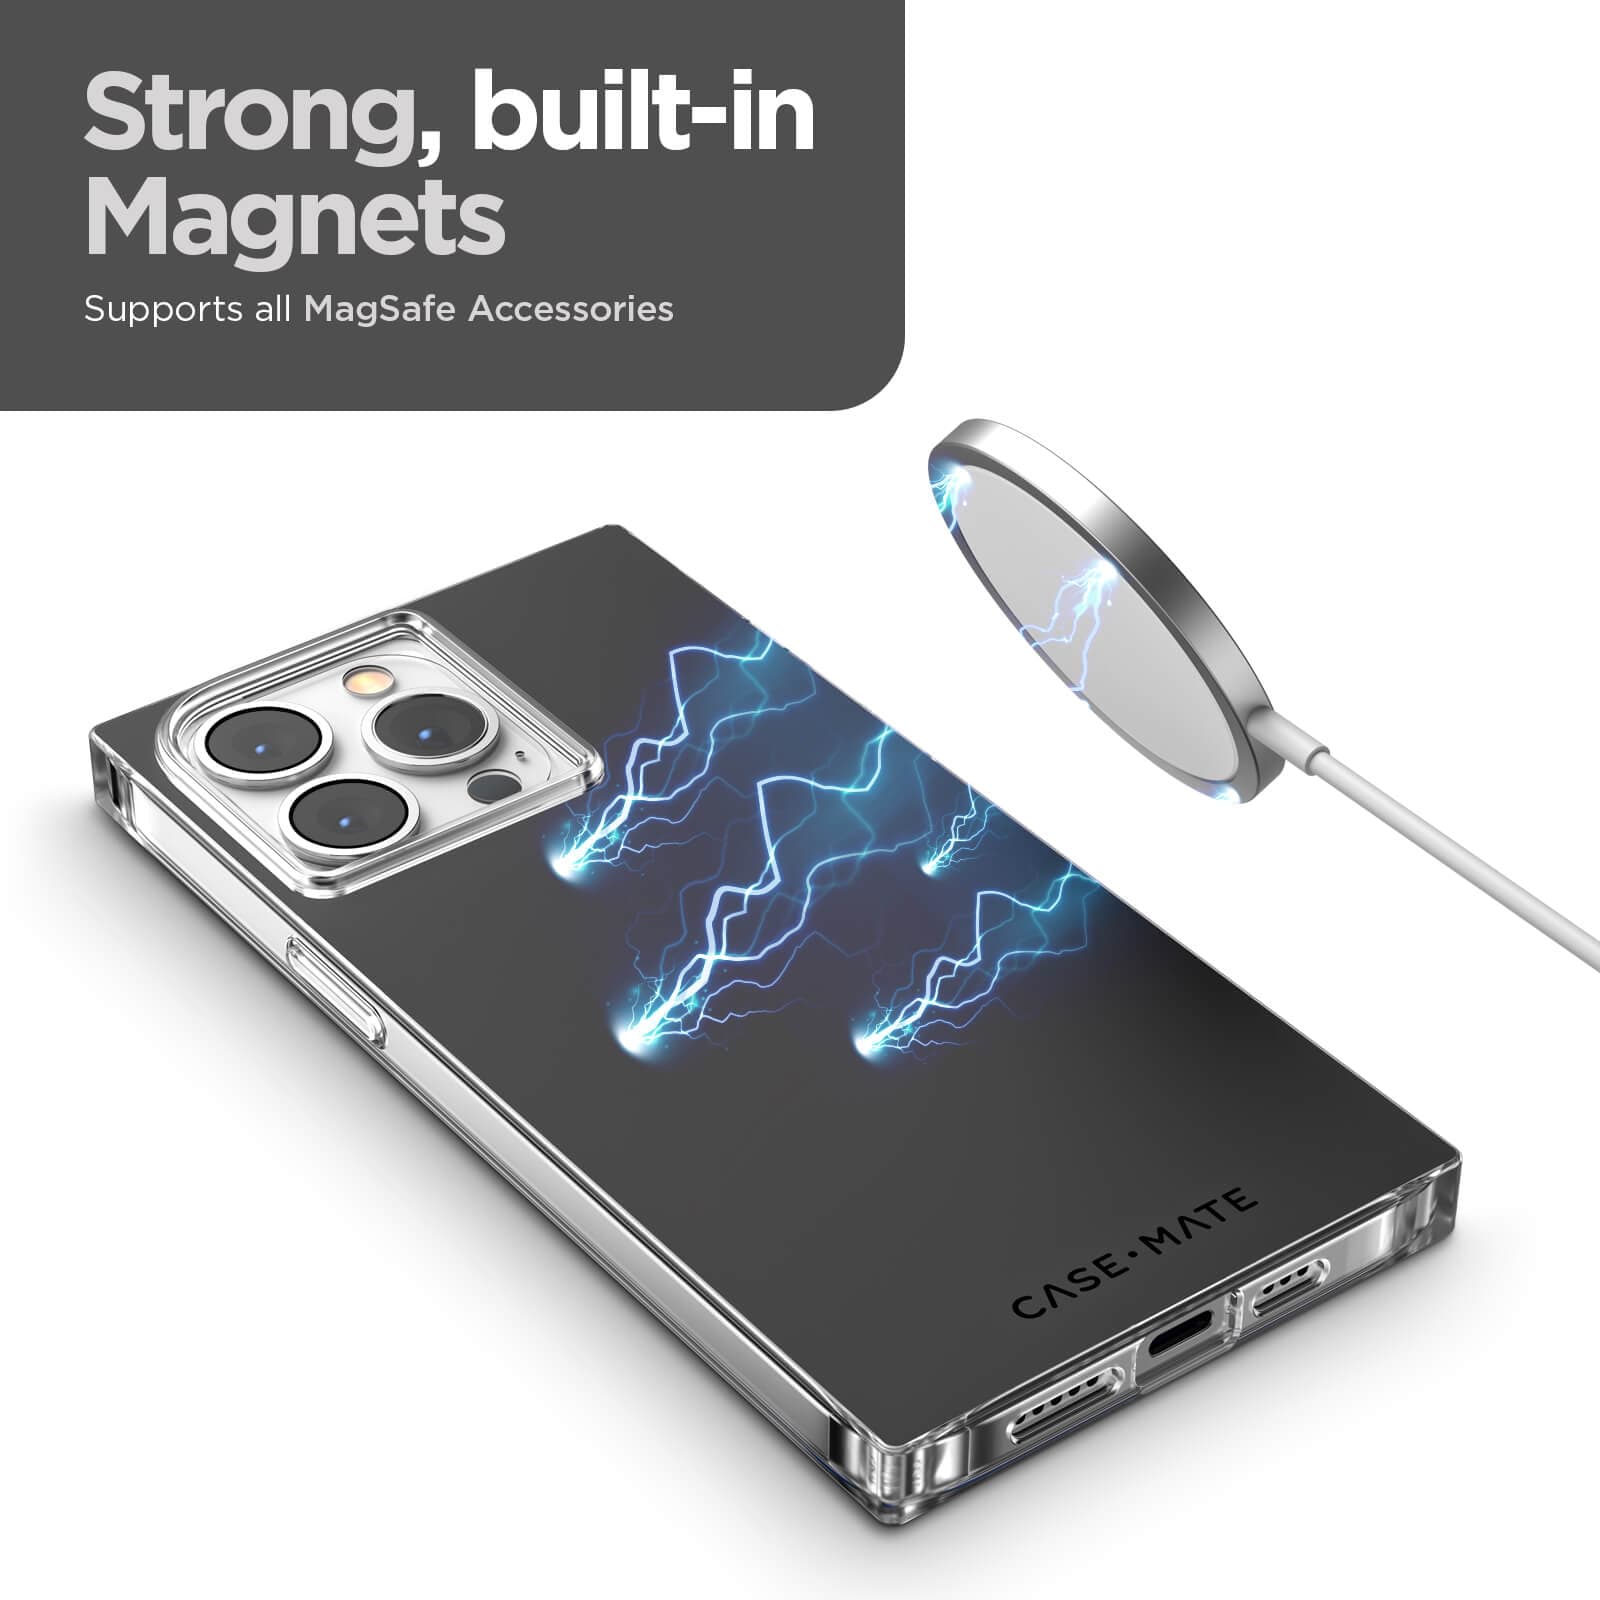 Strong, built-in magnets supports all MagSafe accessories. color::Black